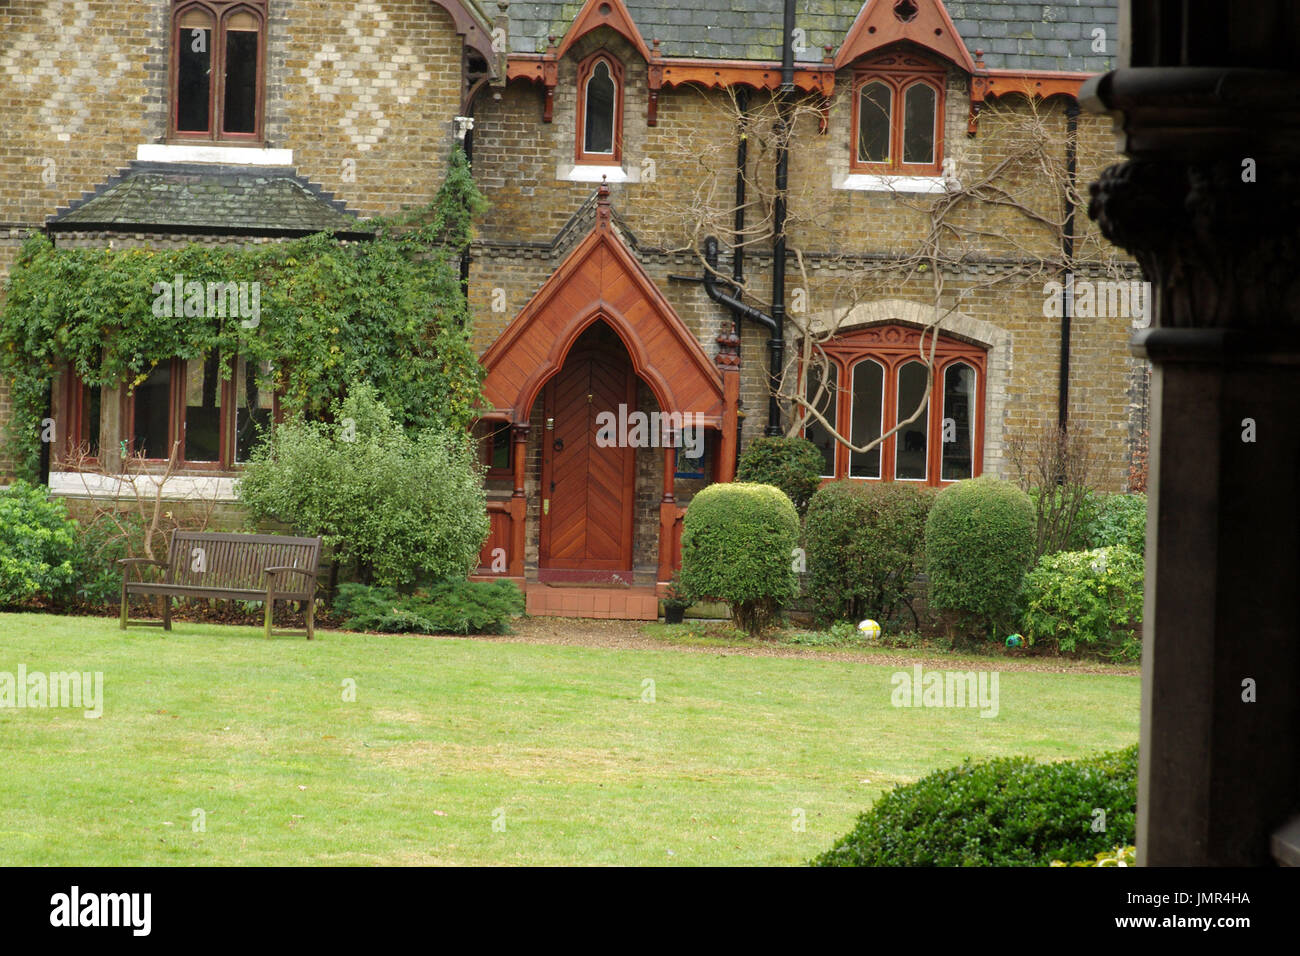 Holly Village, Grade 2 listed Gothic style buildings dating from 1865, architect Henry Darybishire, Highgate, London, England Stock Photo